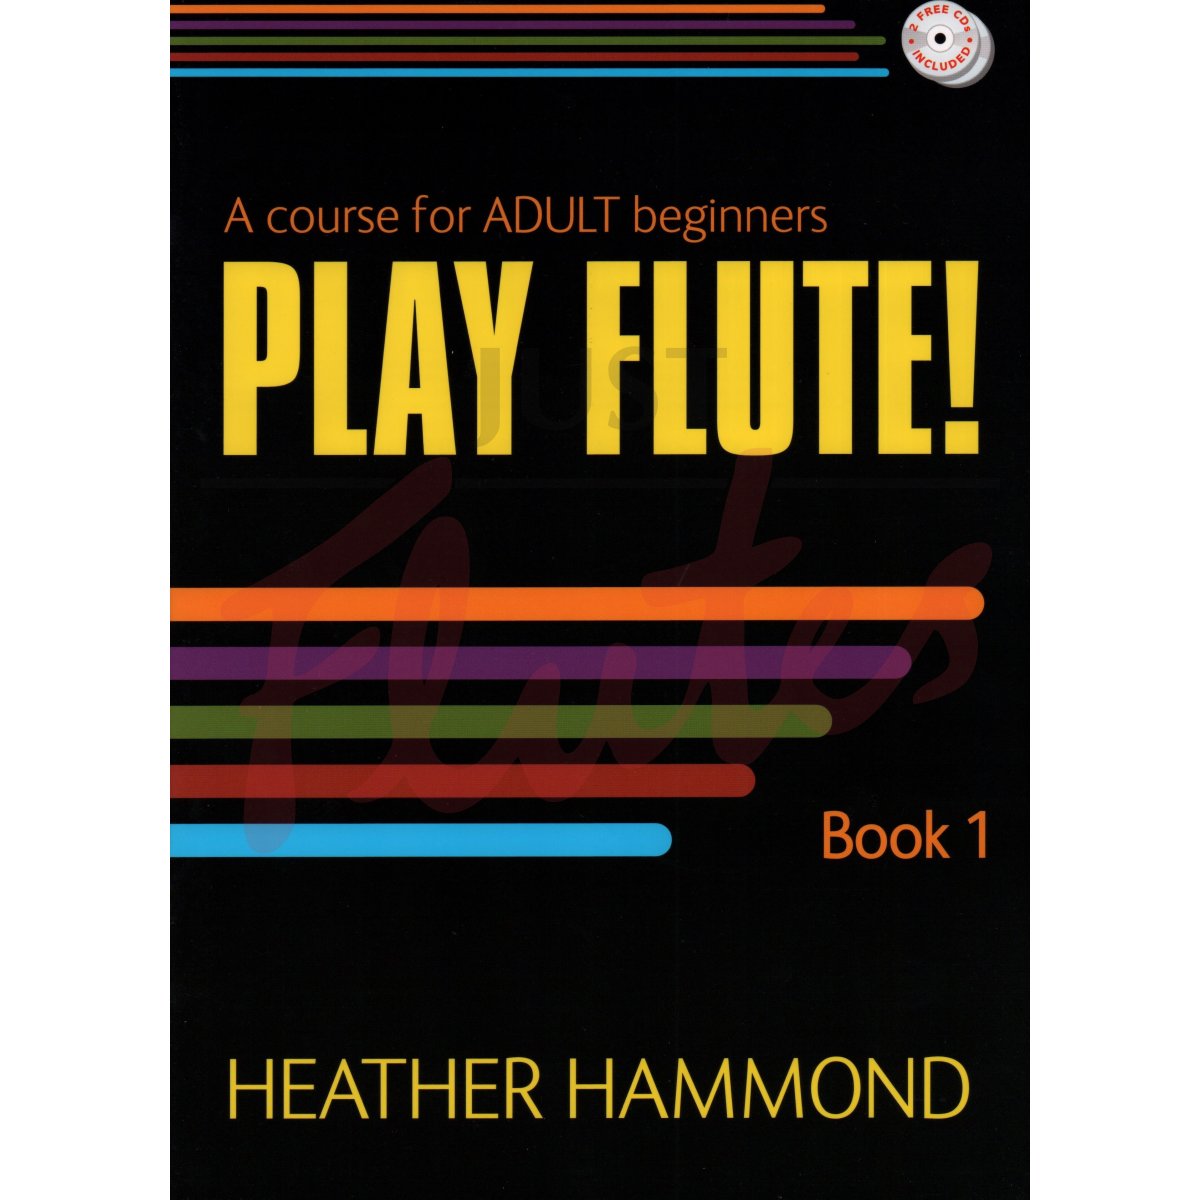 Play Flute! A Course for Adult Beginners